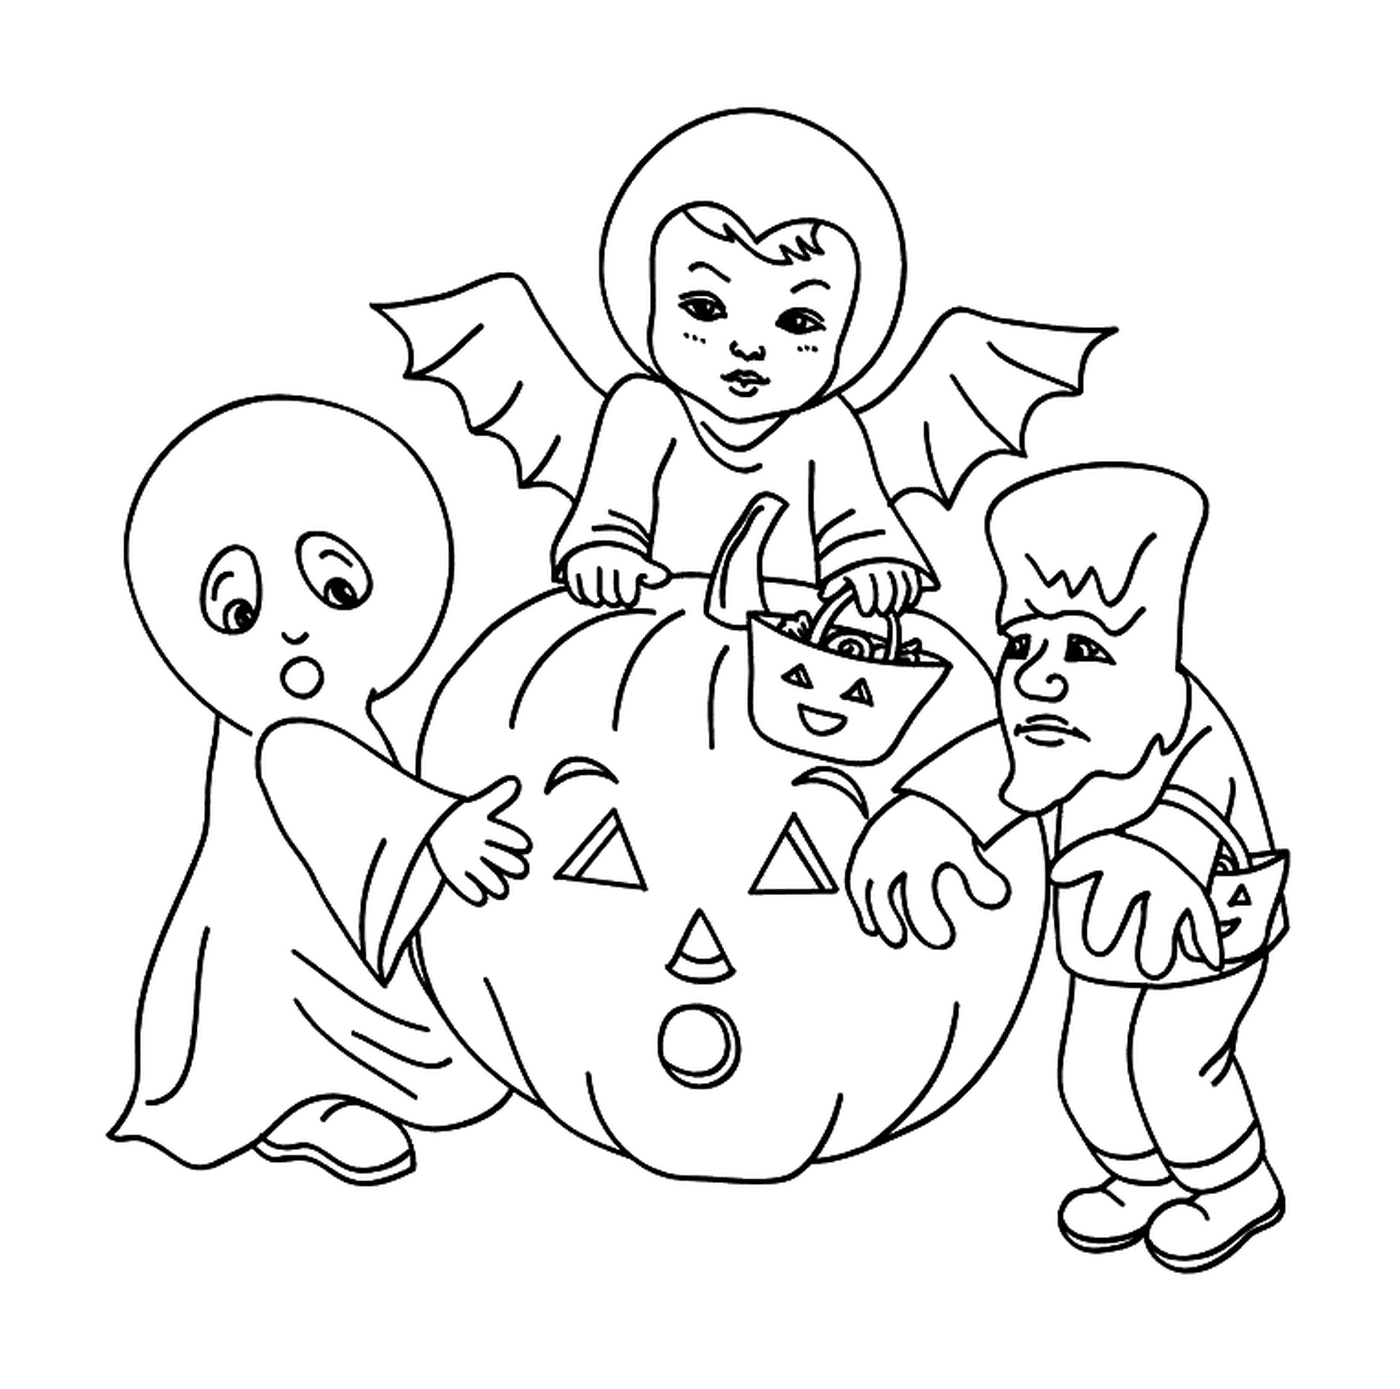  Three kids dressed up for Halloween with a pumpkin 